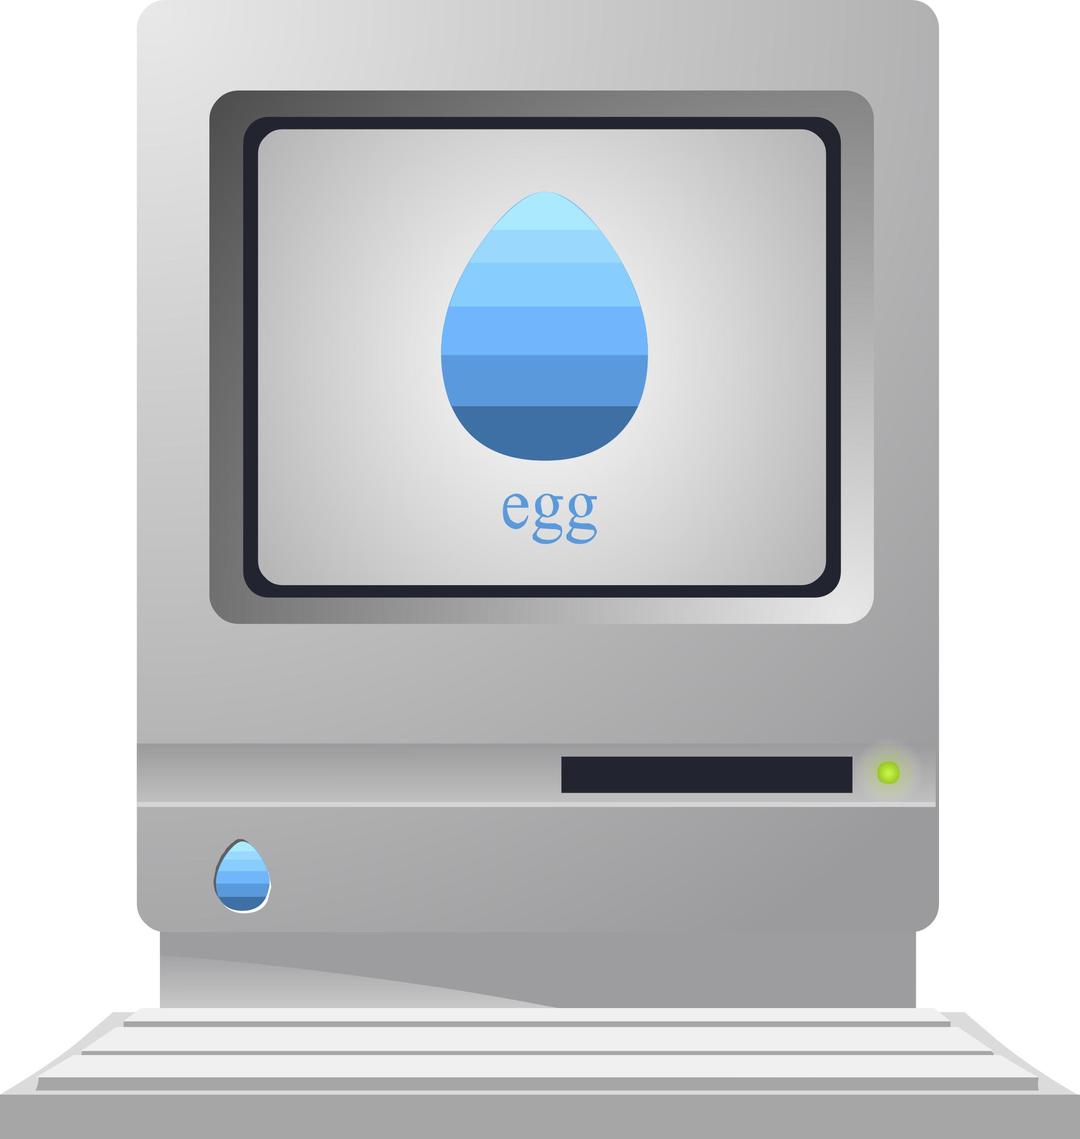 Anachronistic vintage 'egg' computer from Glitch png transparent